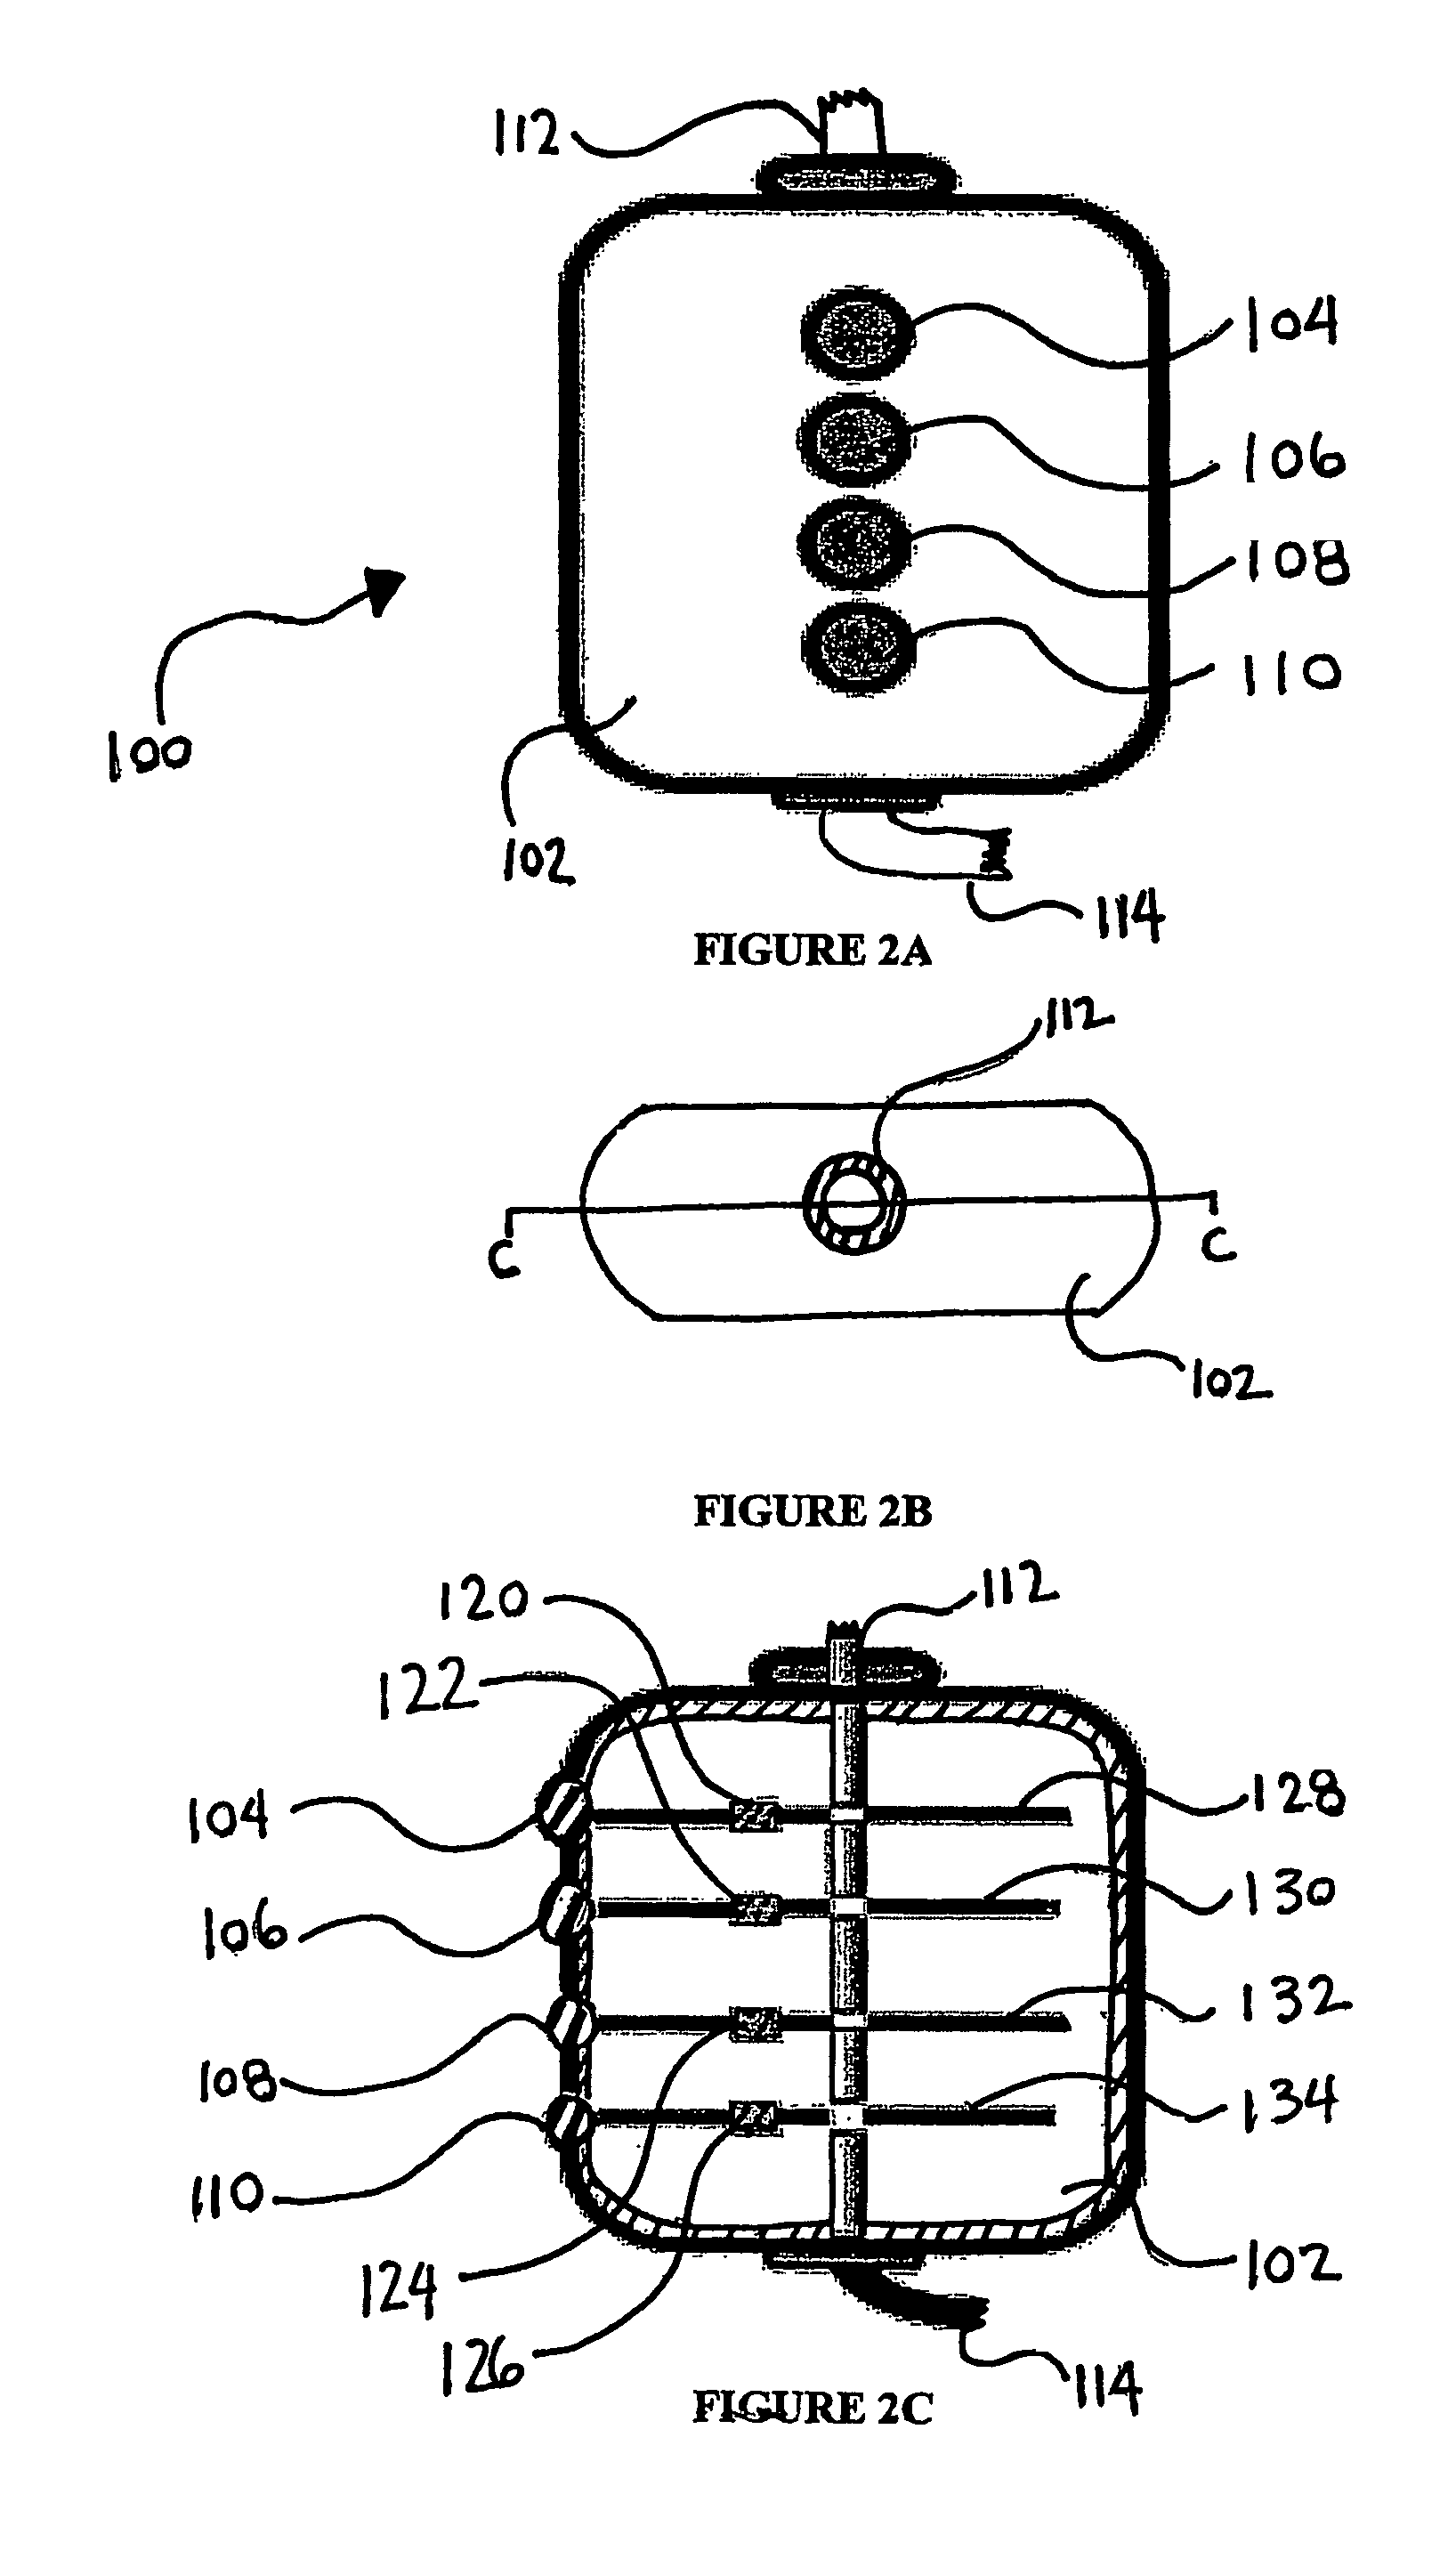 Methods and apparatus for urodynamic analysis